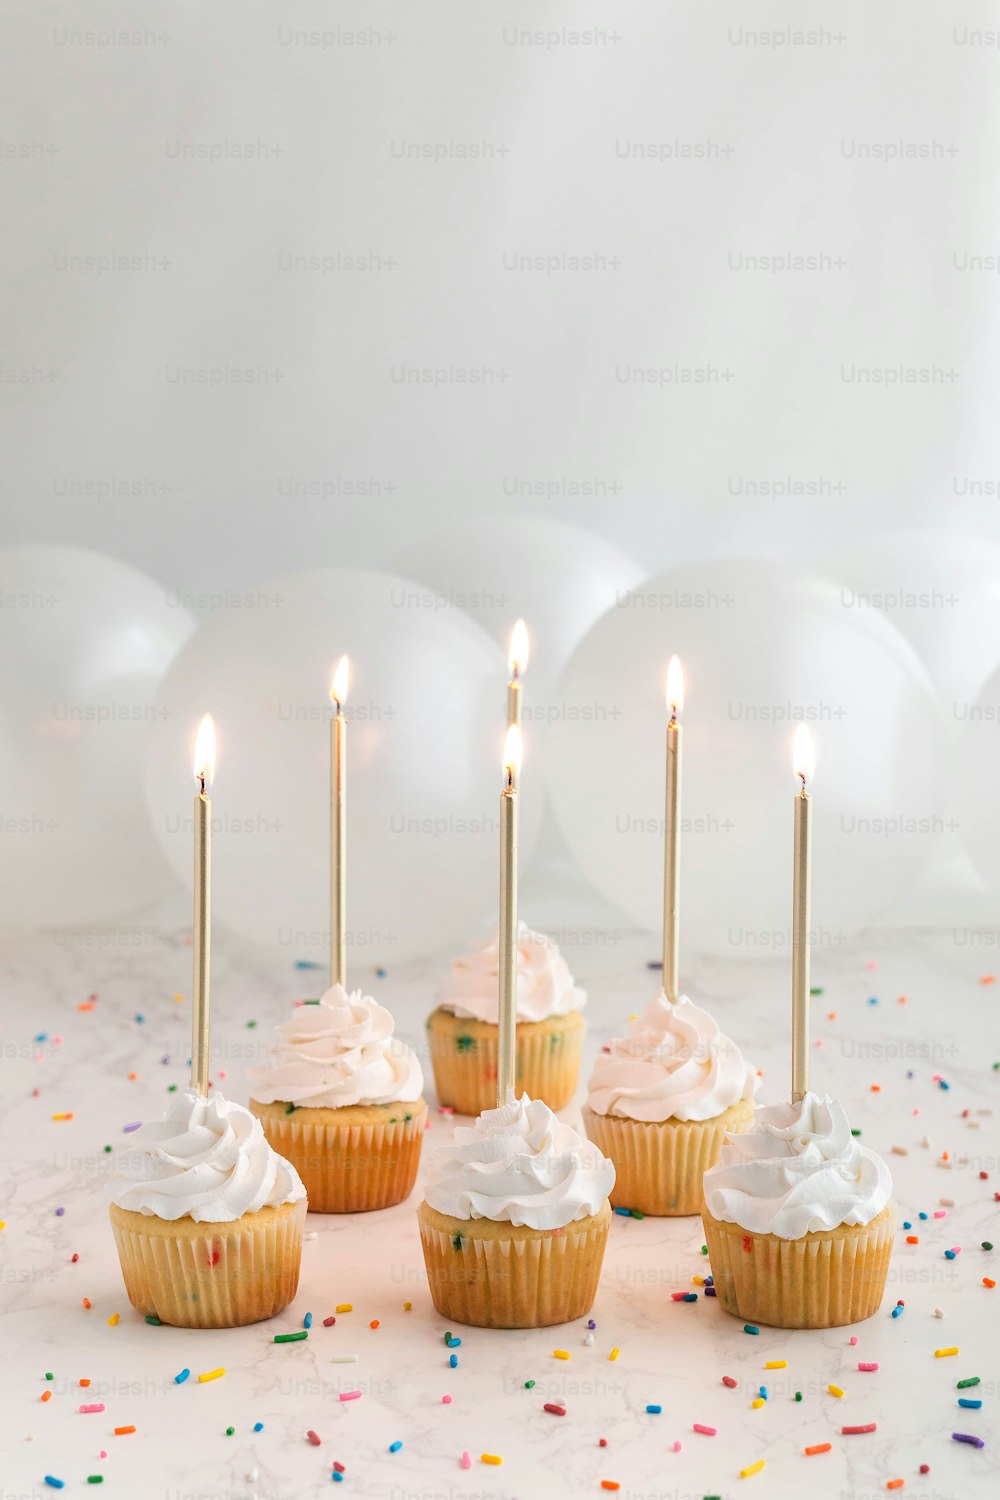 a group of cupcakes with white frosting and lit candles